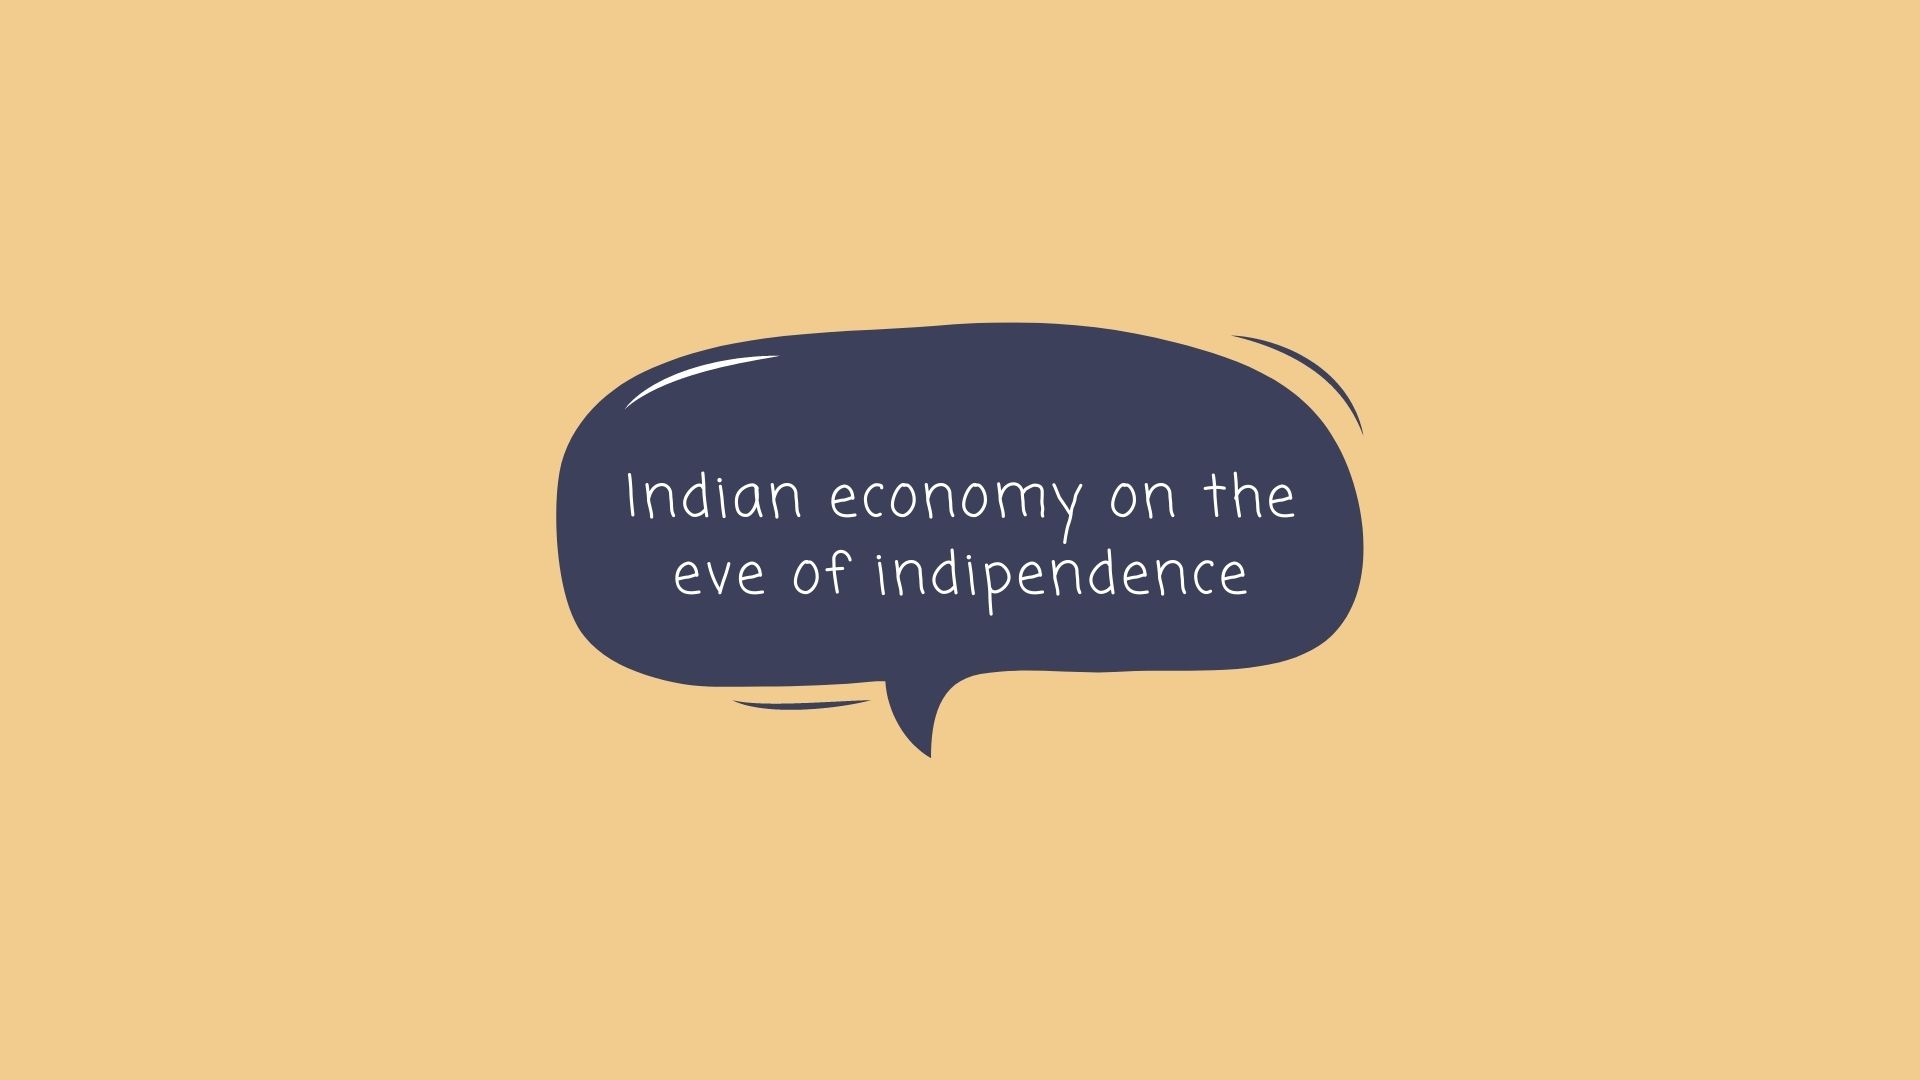 Indian economy on the eve of indipendence